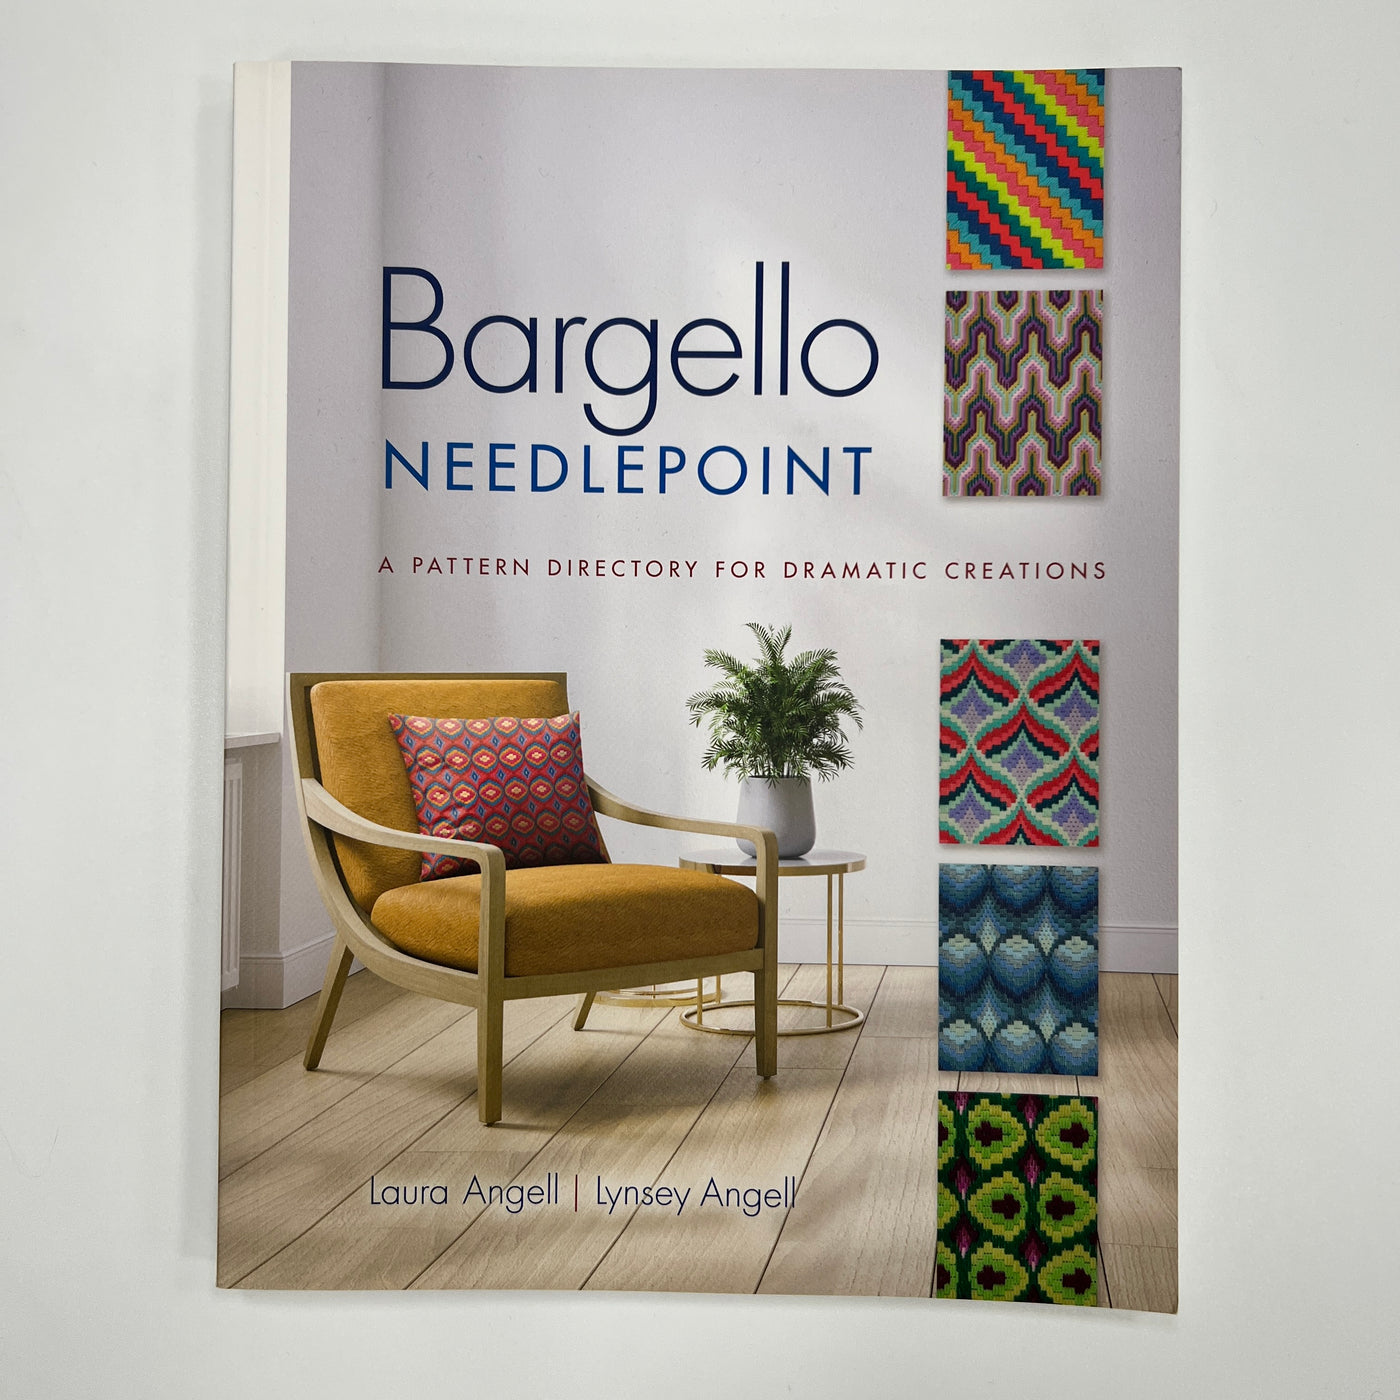 Bargello Needlepoint book by Laura & Lynsey Angell